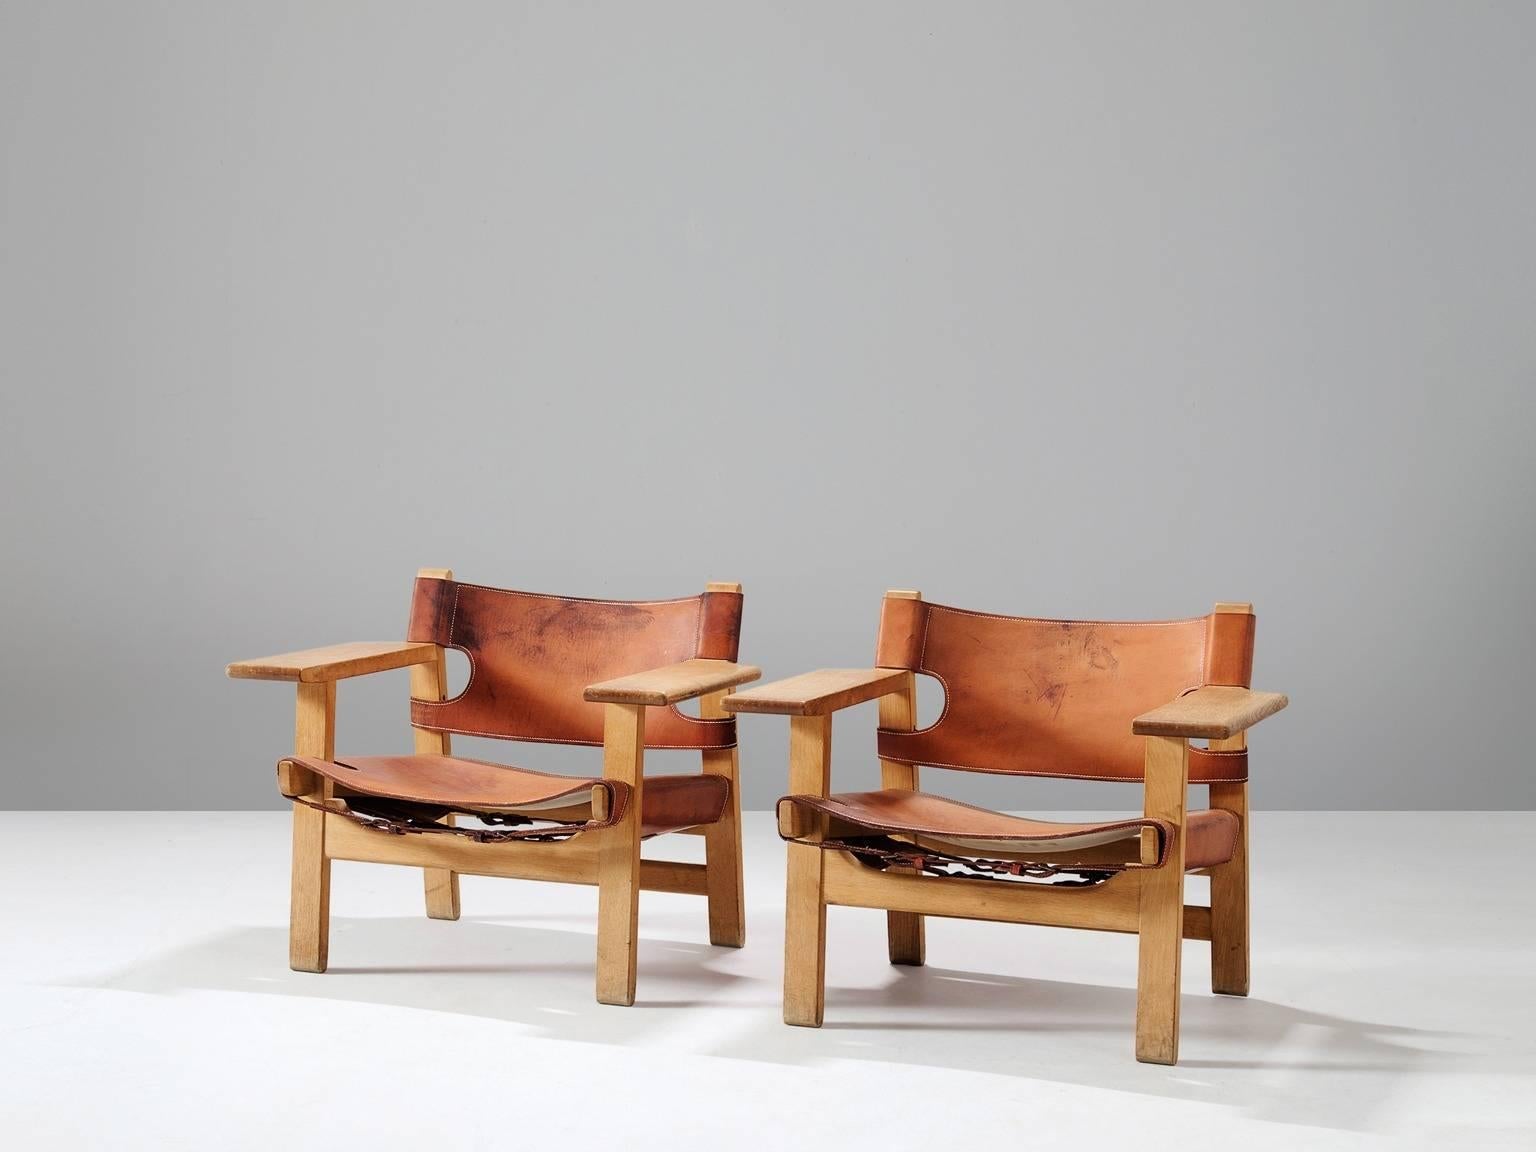 Pair of 'Spanish Chairs', in solid oak and cognac leather, by Børge Mogensen for Fredericia Stolefabrik, Denmark 1958. 

This well known design by Mogensen has a very strong appearance. The sincere construction and ditto type of upholstery, give the